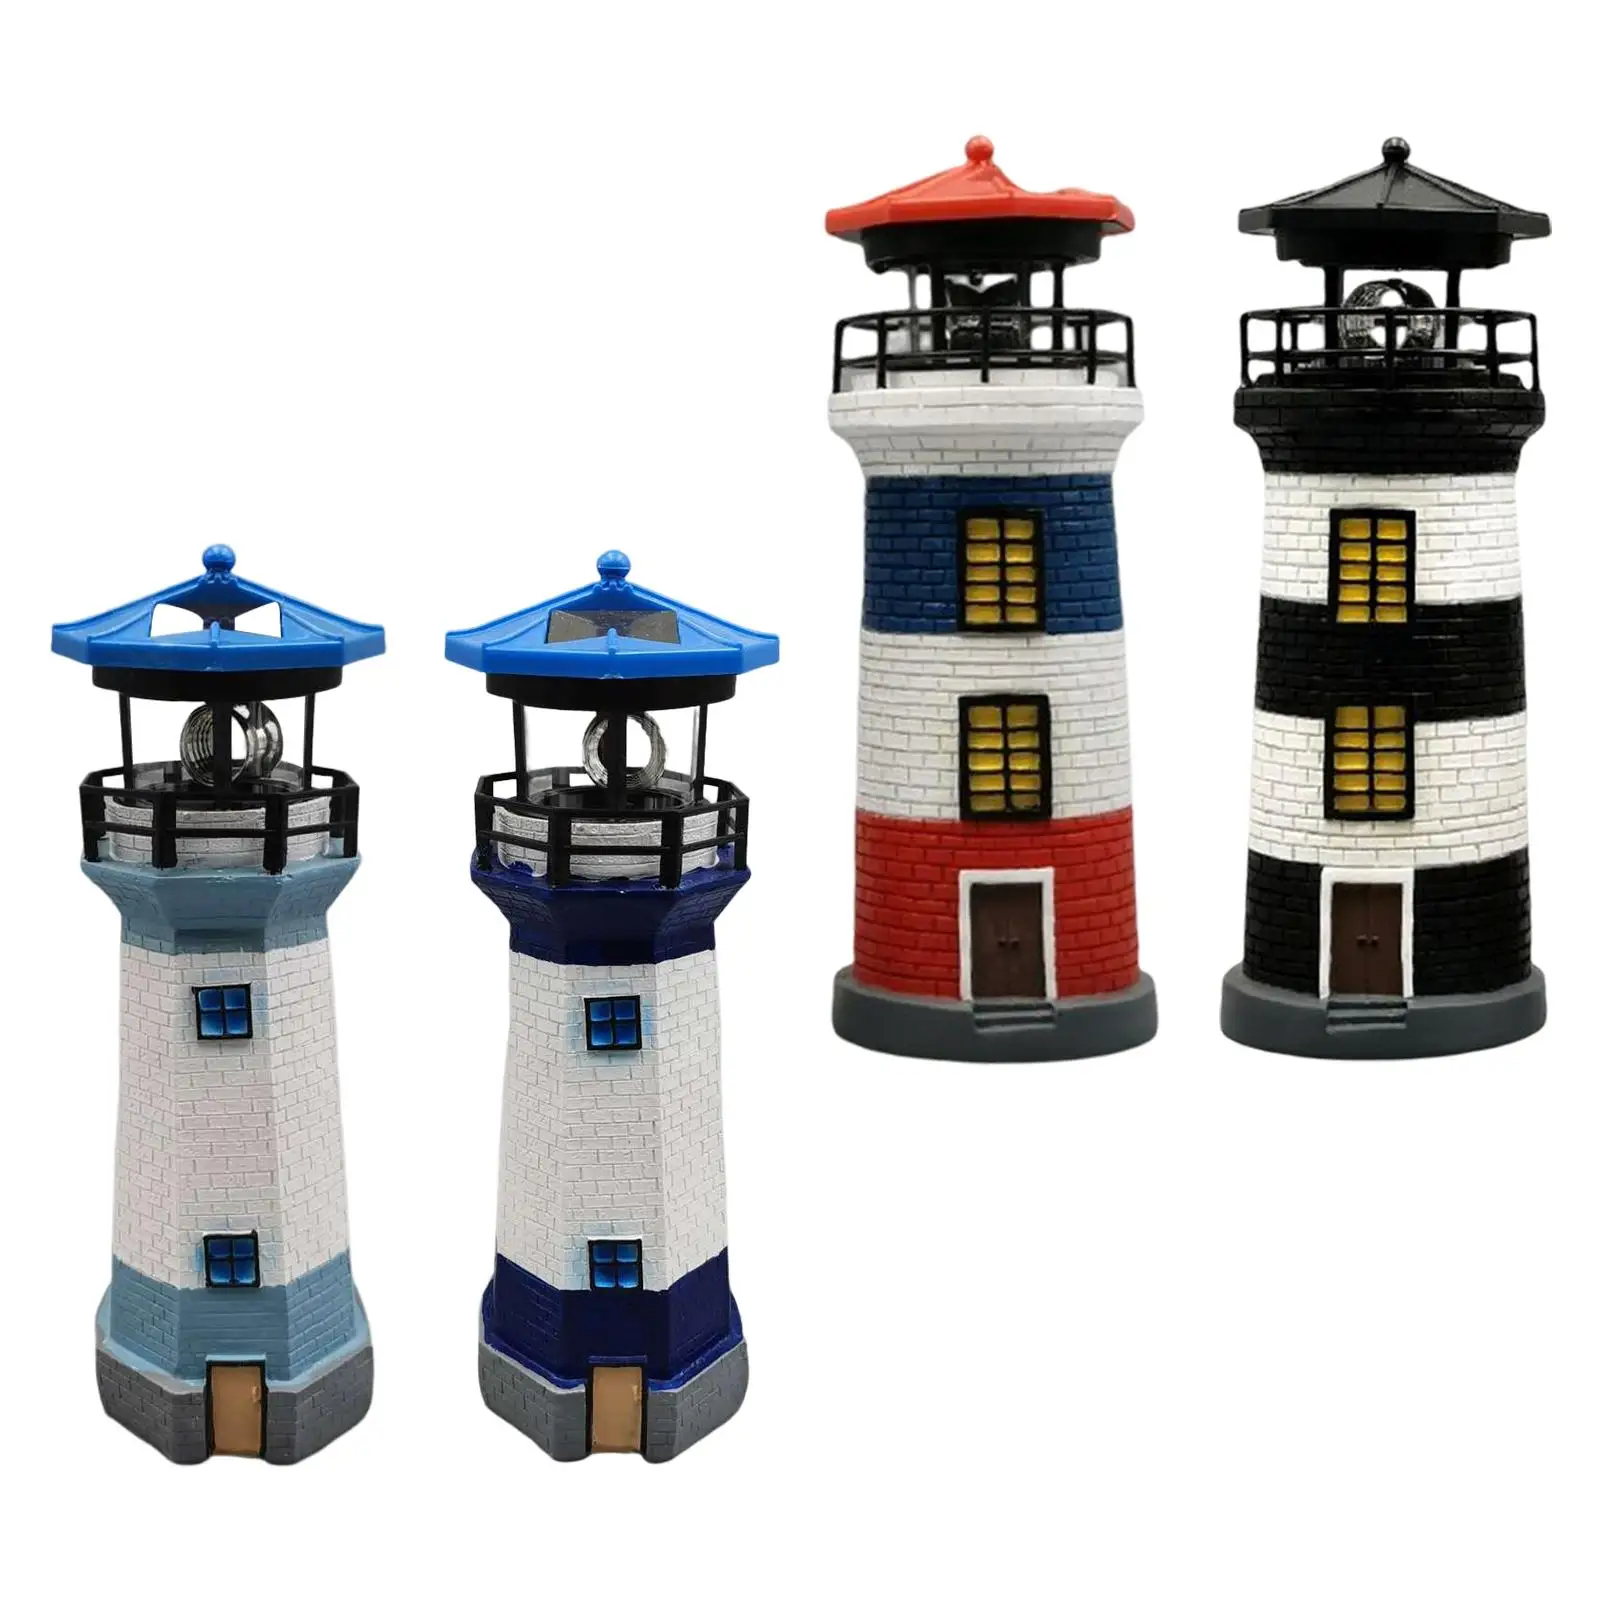 Windmill Solar Lighthouse Resin garden Lights Bright Waterproof for Lawn gift Courtyard Patio